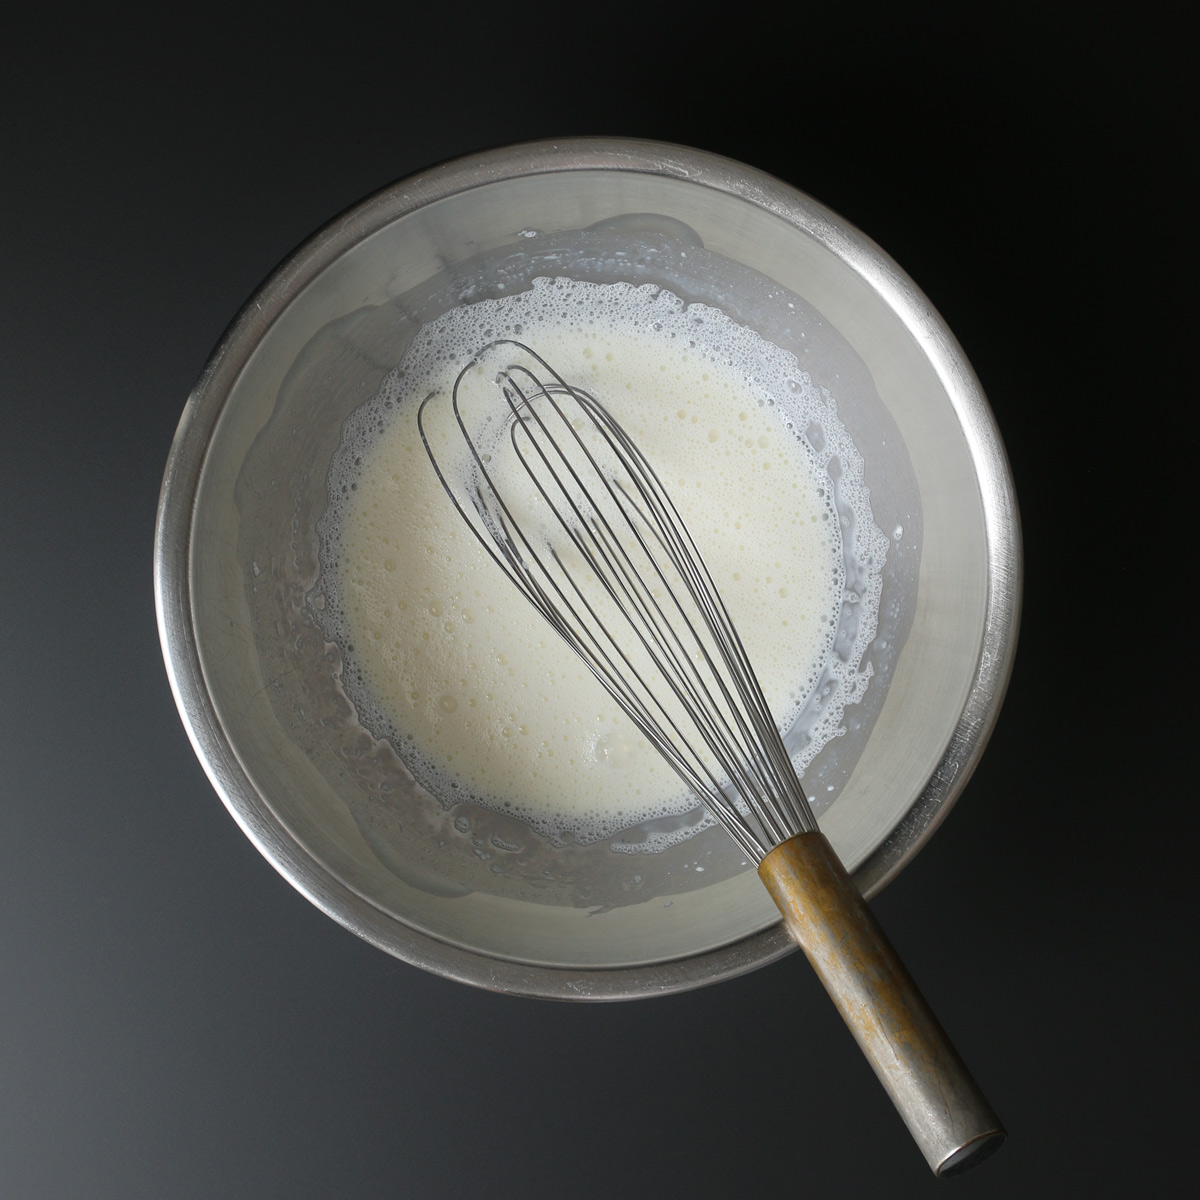 wet ingredients combined, with a whisk, in the mixing bowl.